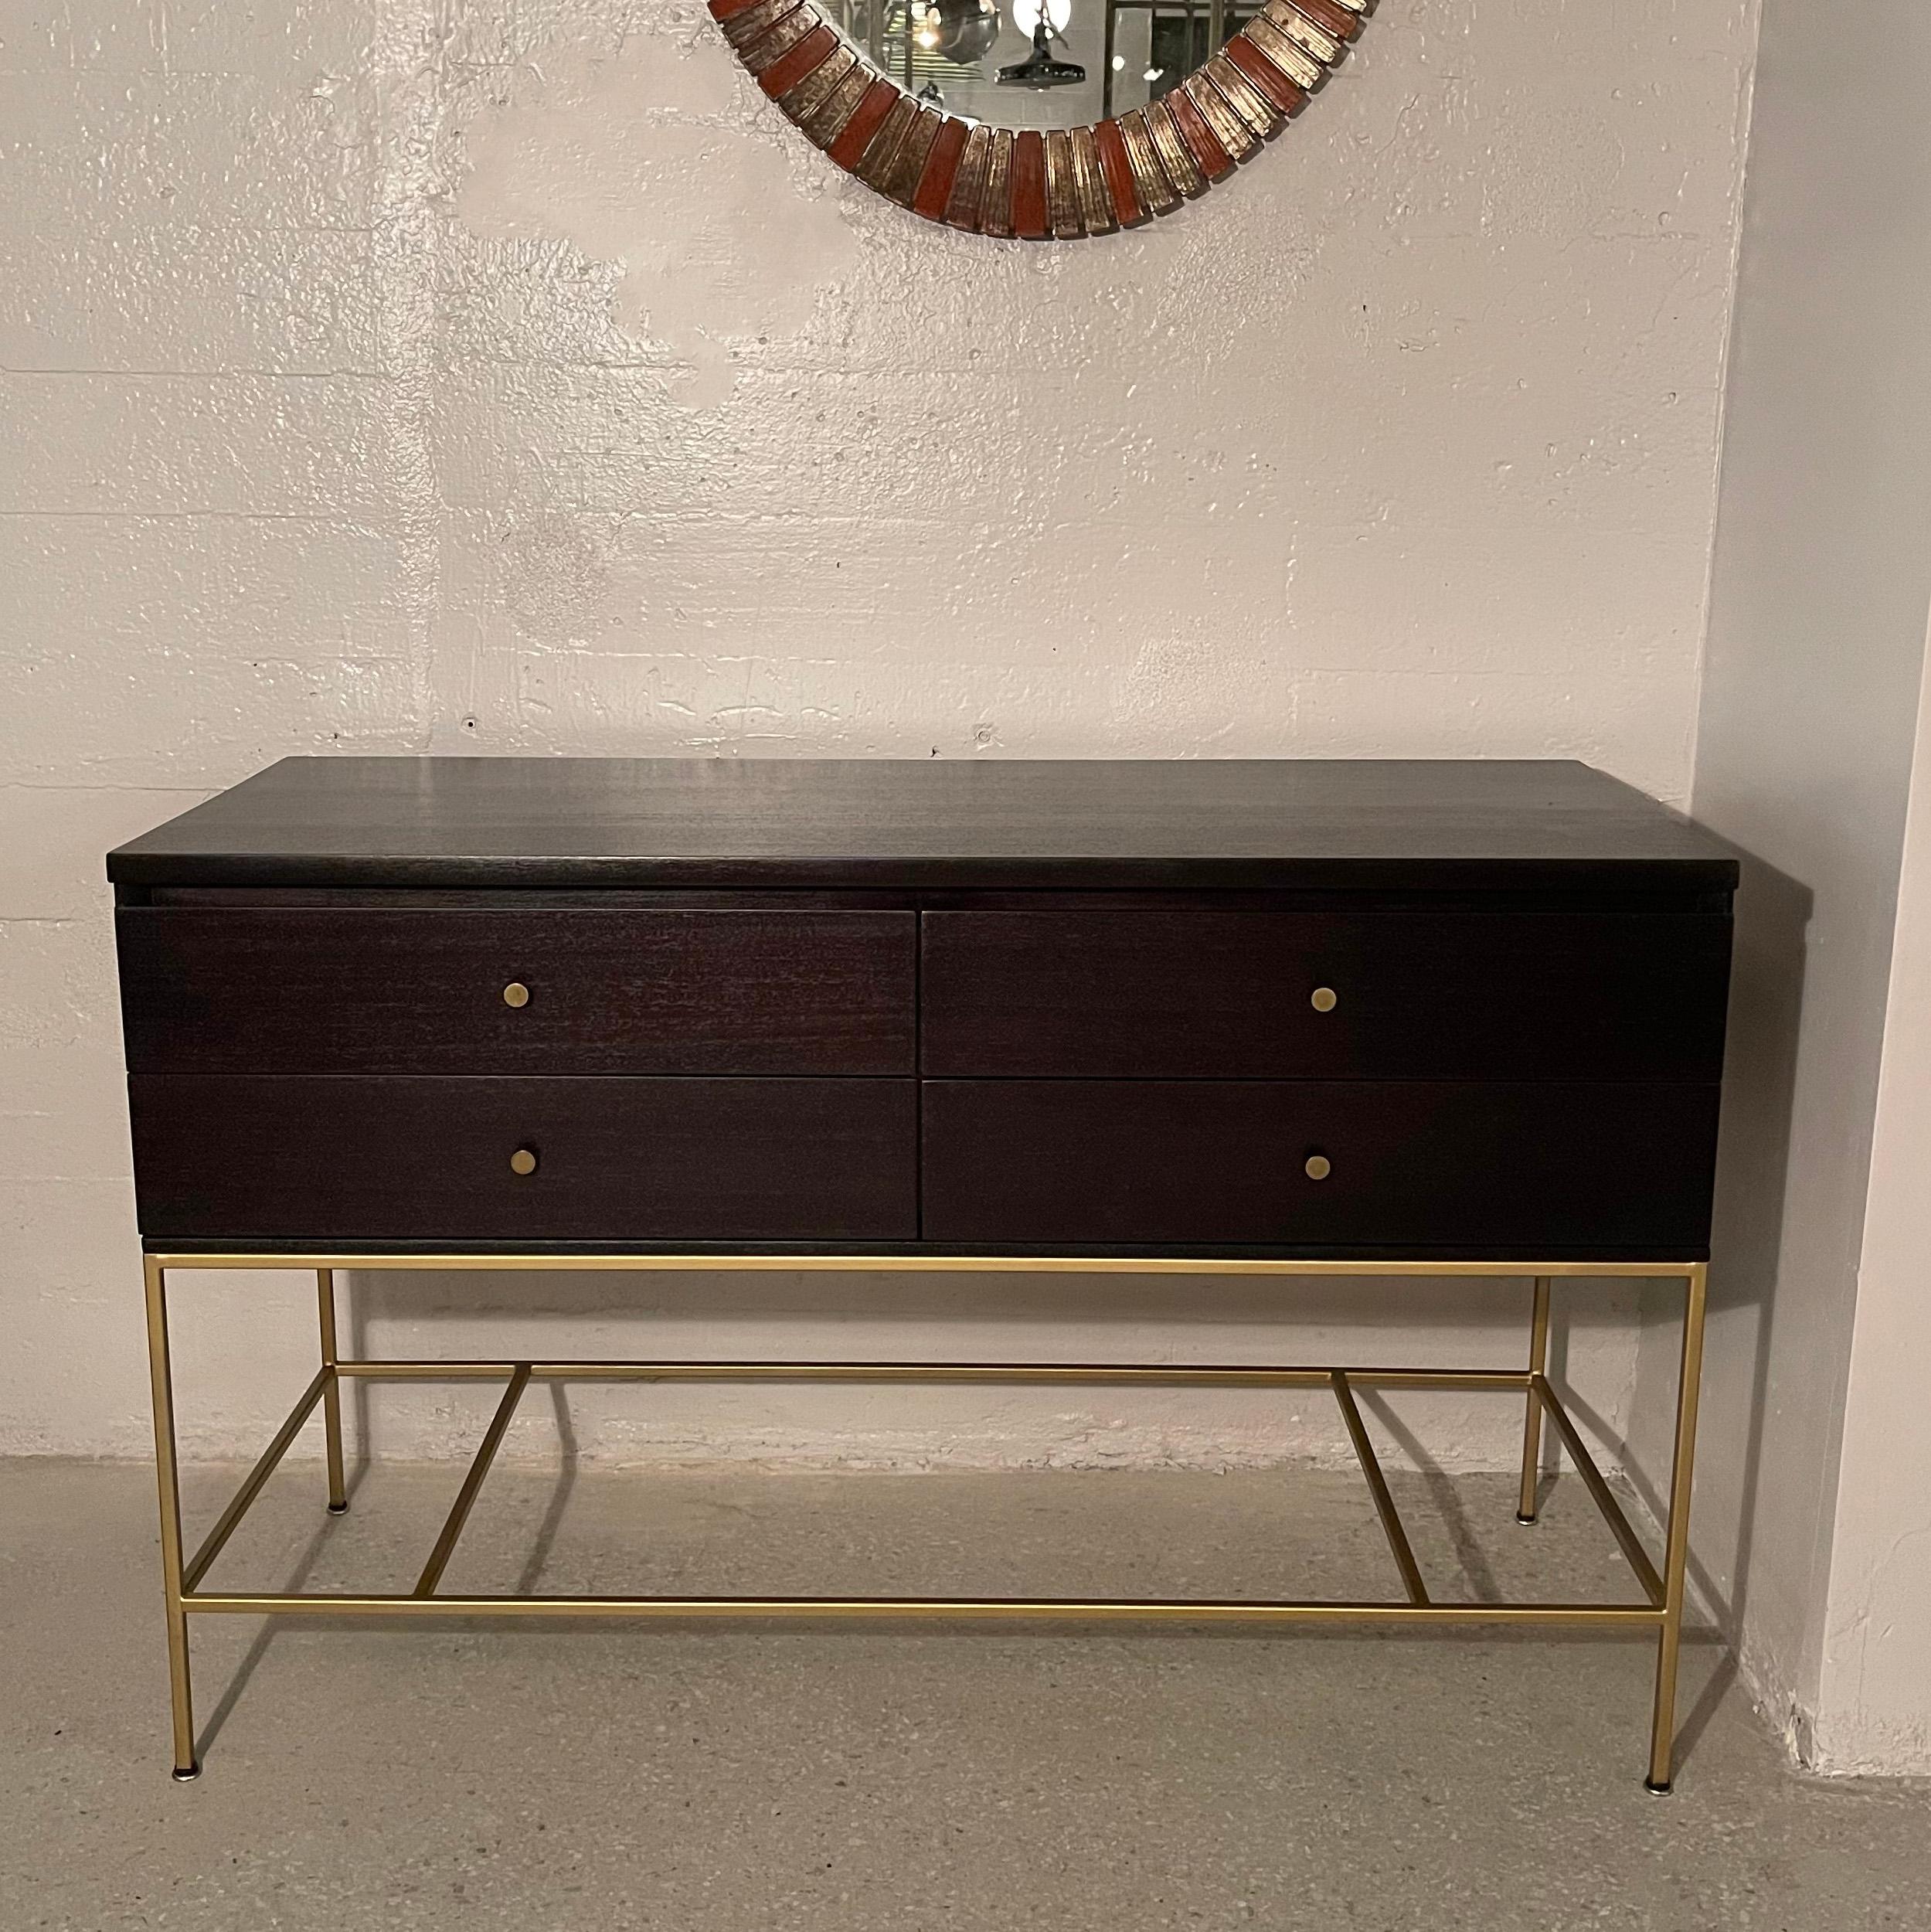 Mid-Century Modern, sideboard cabinet by Paul McCobb for Calvin features a 4 drawer ebonized mahogany top on a minimal gilt steel frame with brass pulls. The sideboard is finished on the back as well.